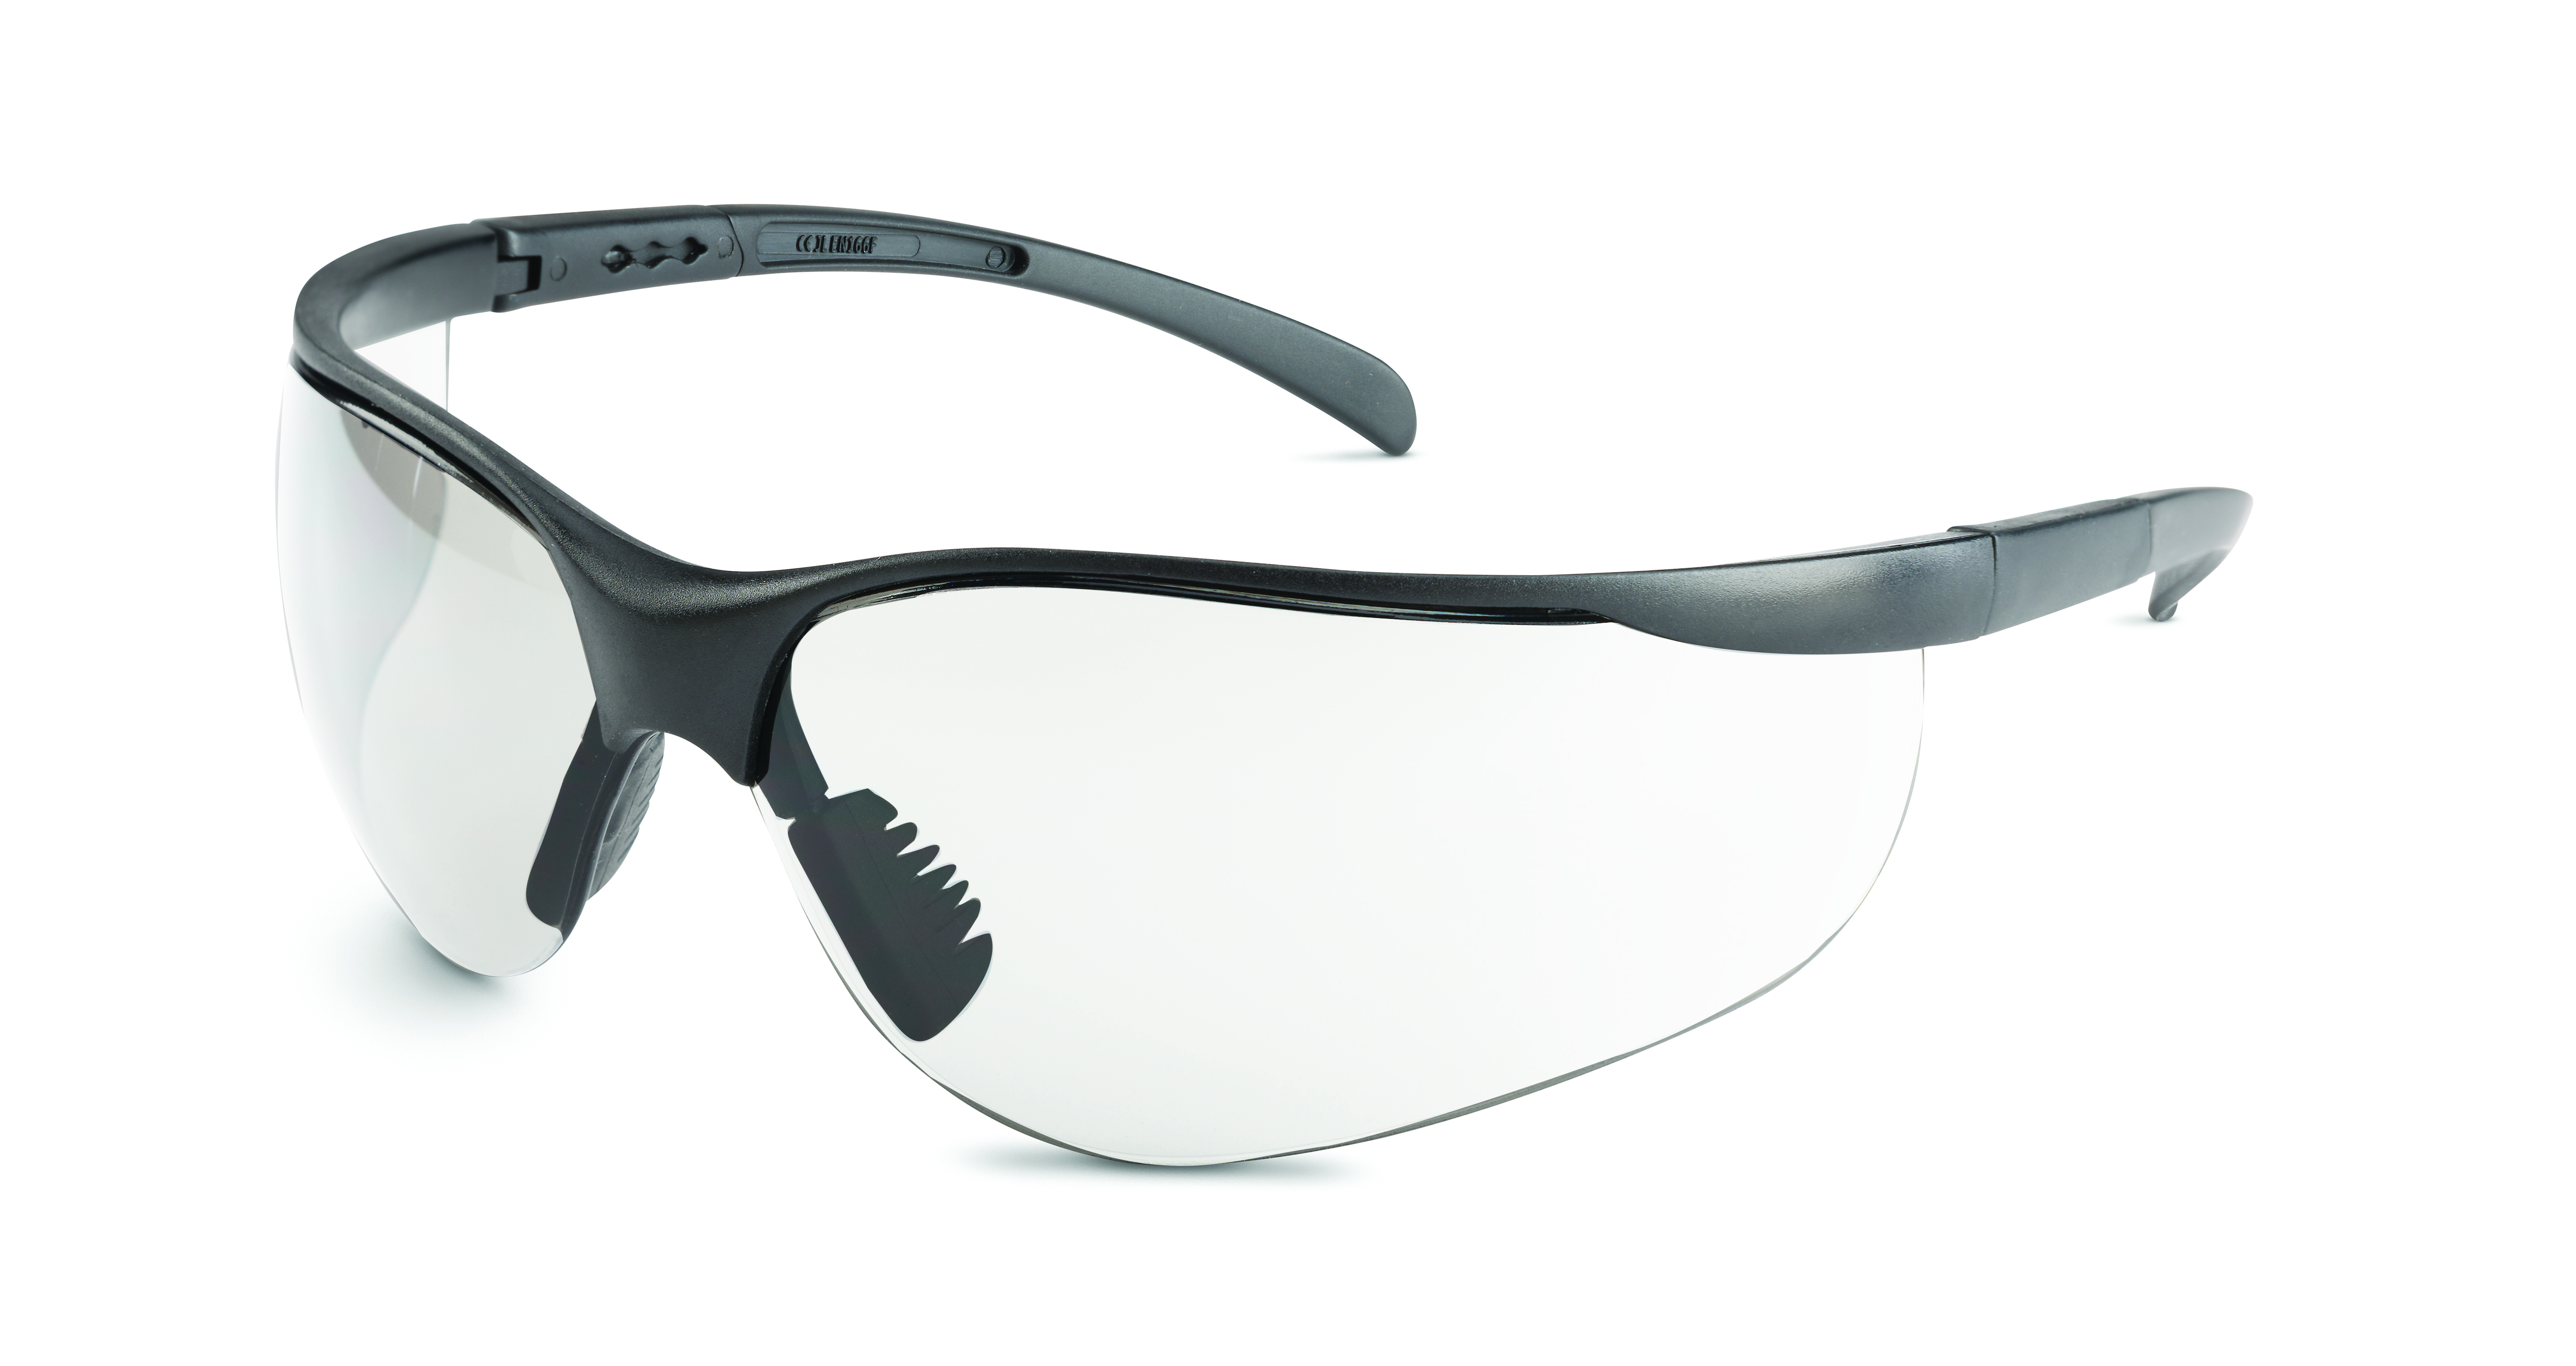 Licorice style, clear lens, anti-scratch, anti-fog - Safety Glasses